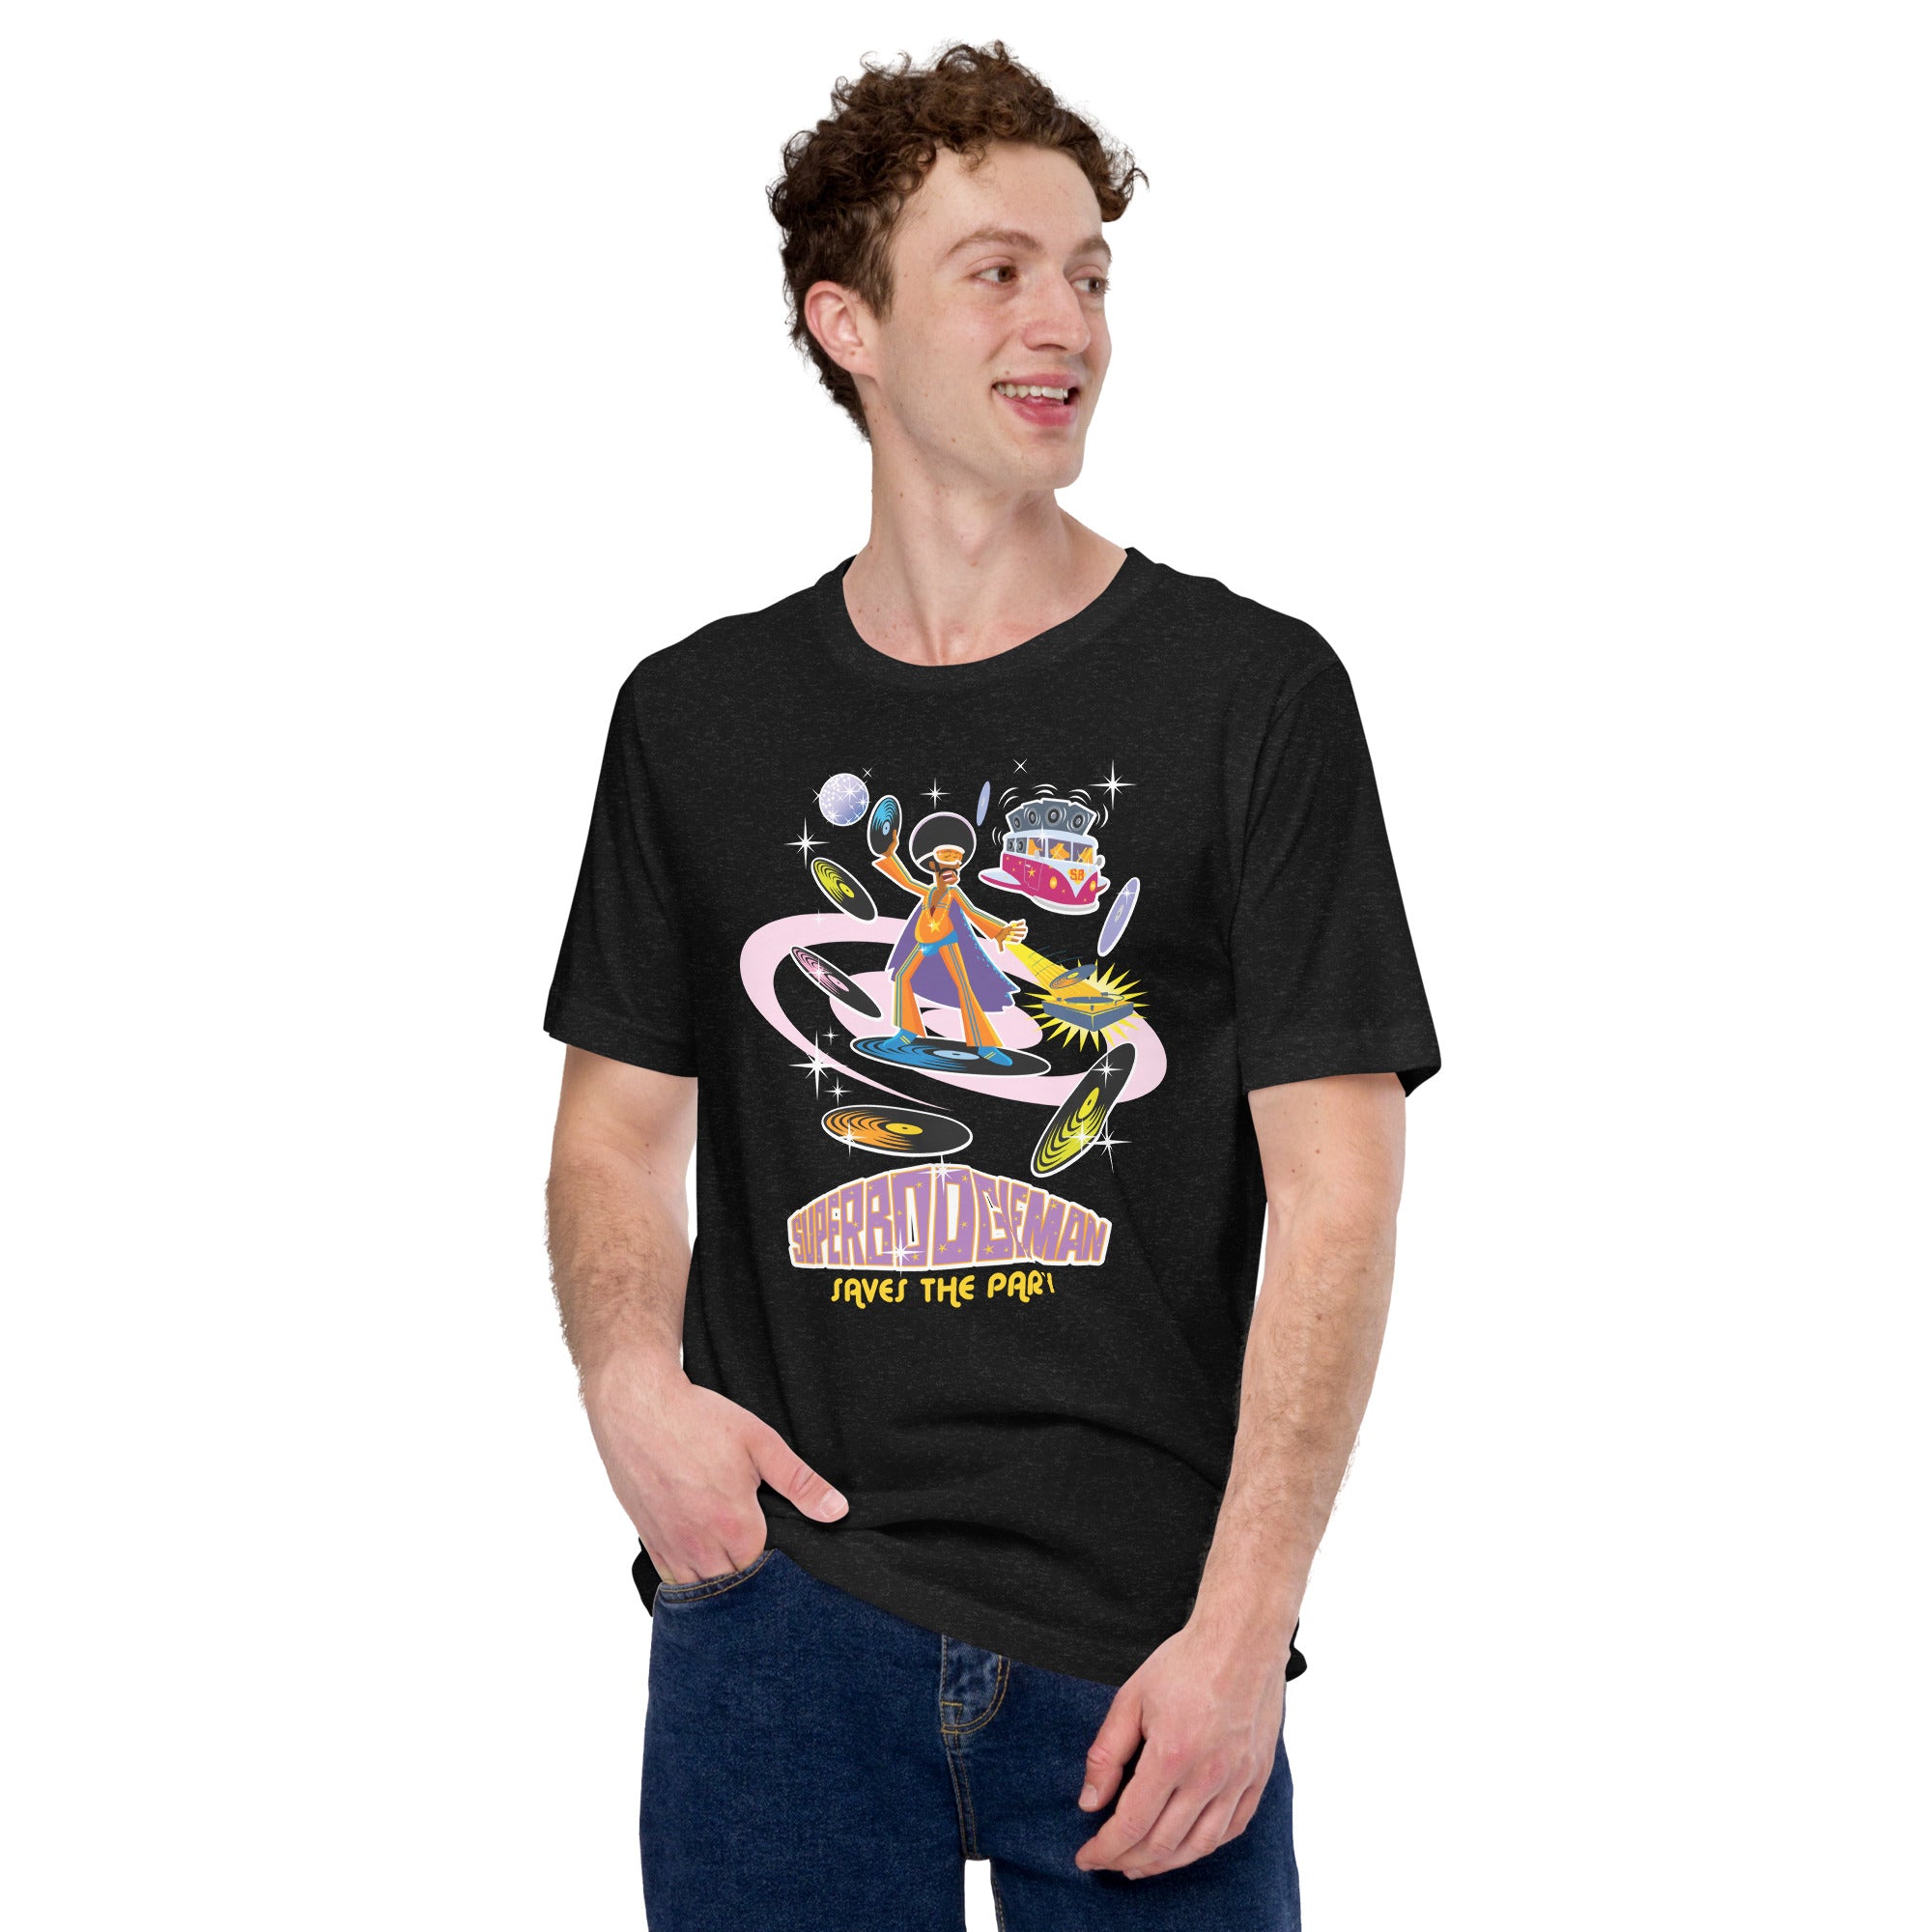 Unisex t-shirt Superboogieman saves the Party on dark heather colors